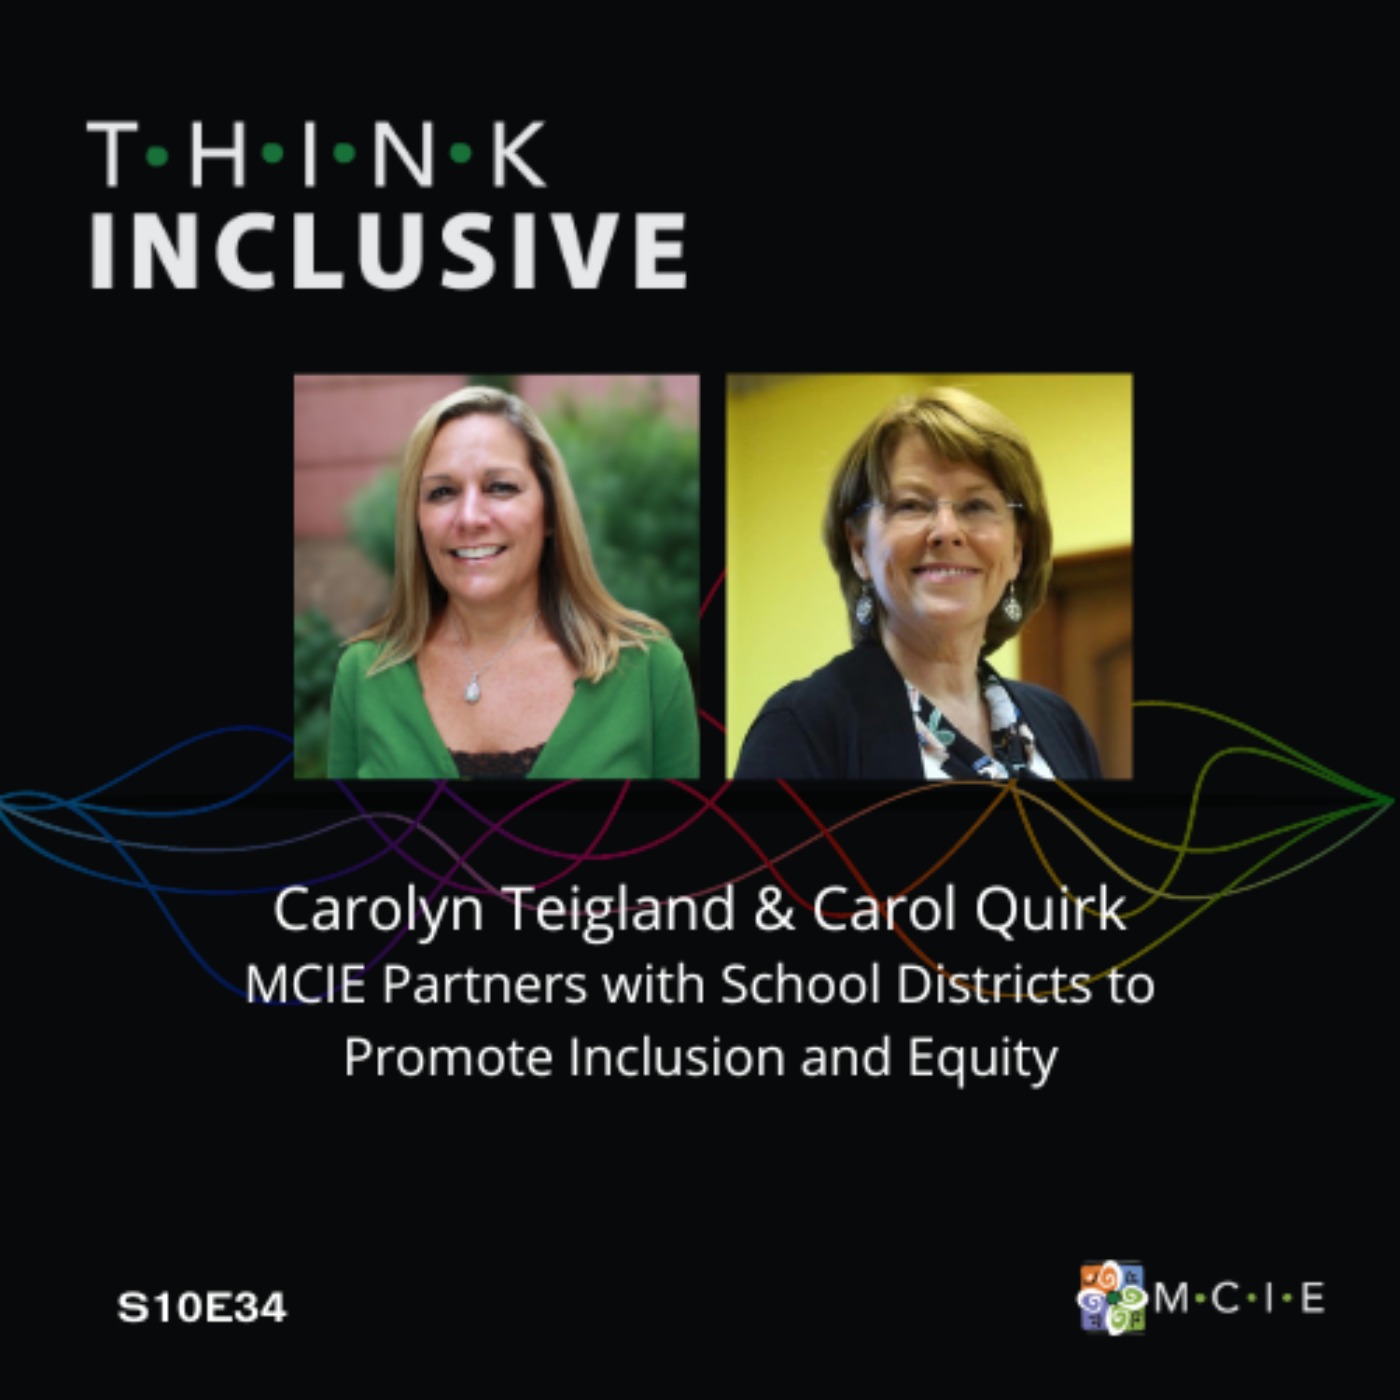 Carolyn Teigland and Carol Quirk | MCIE Partners with School Districts to Promote Inclusion and Equity